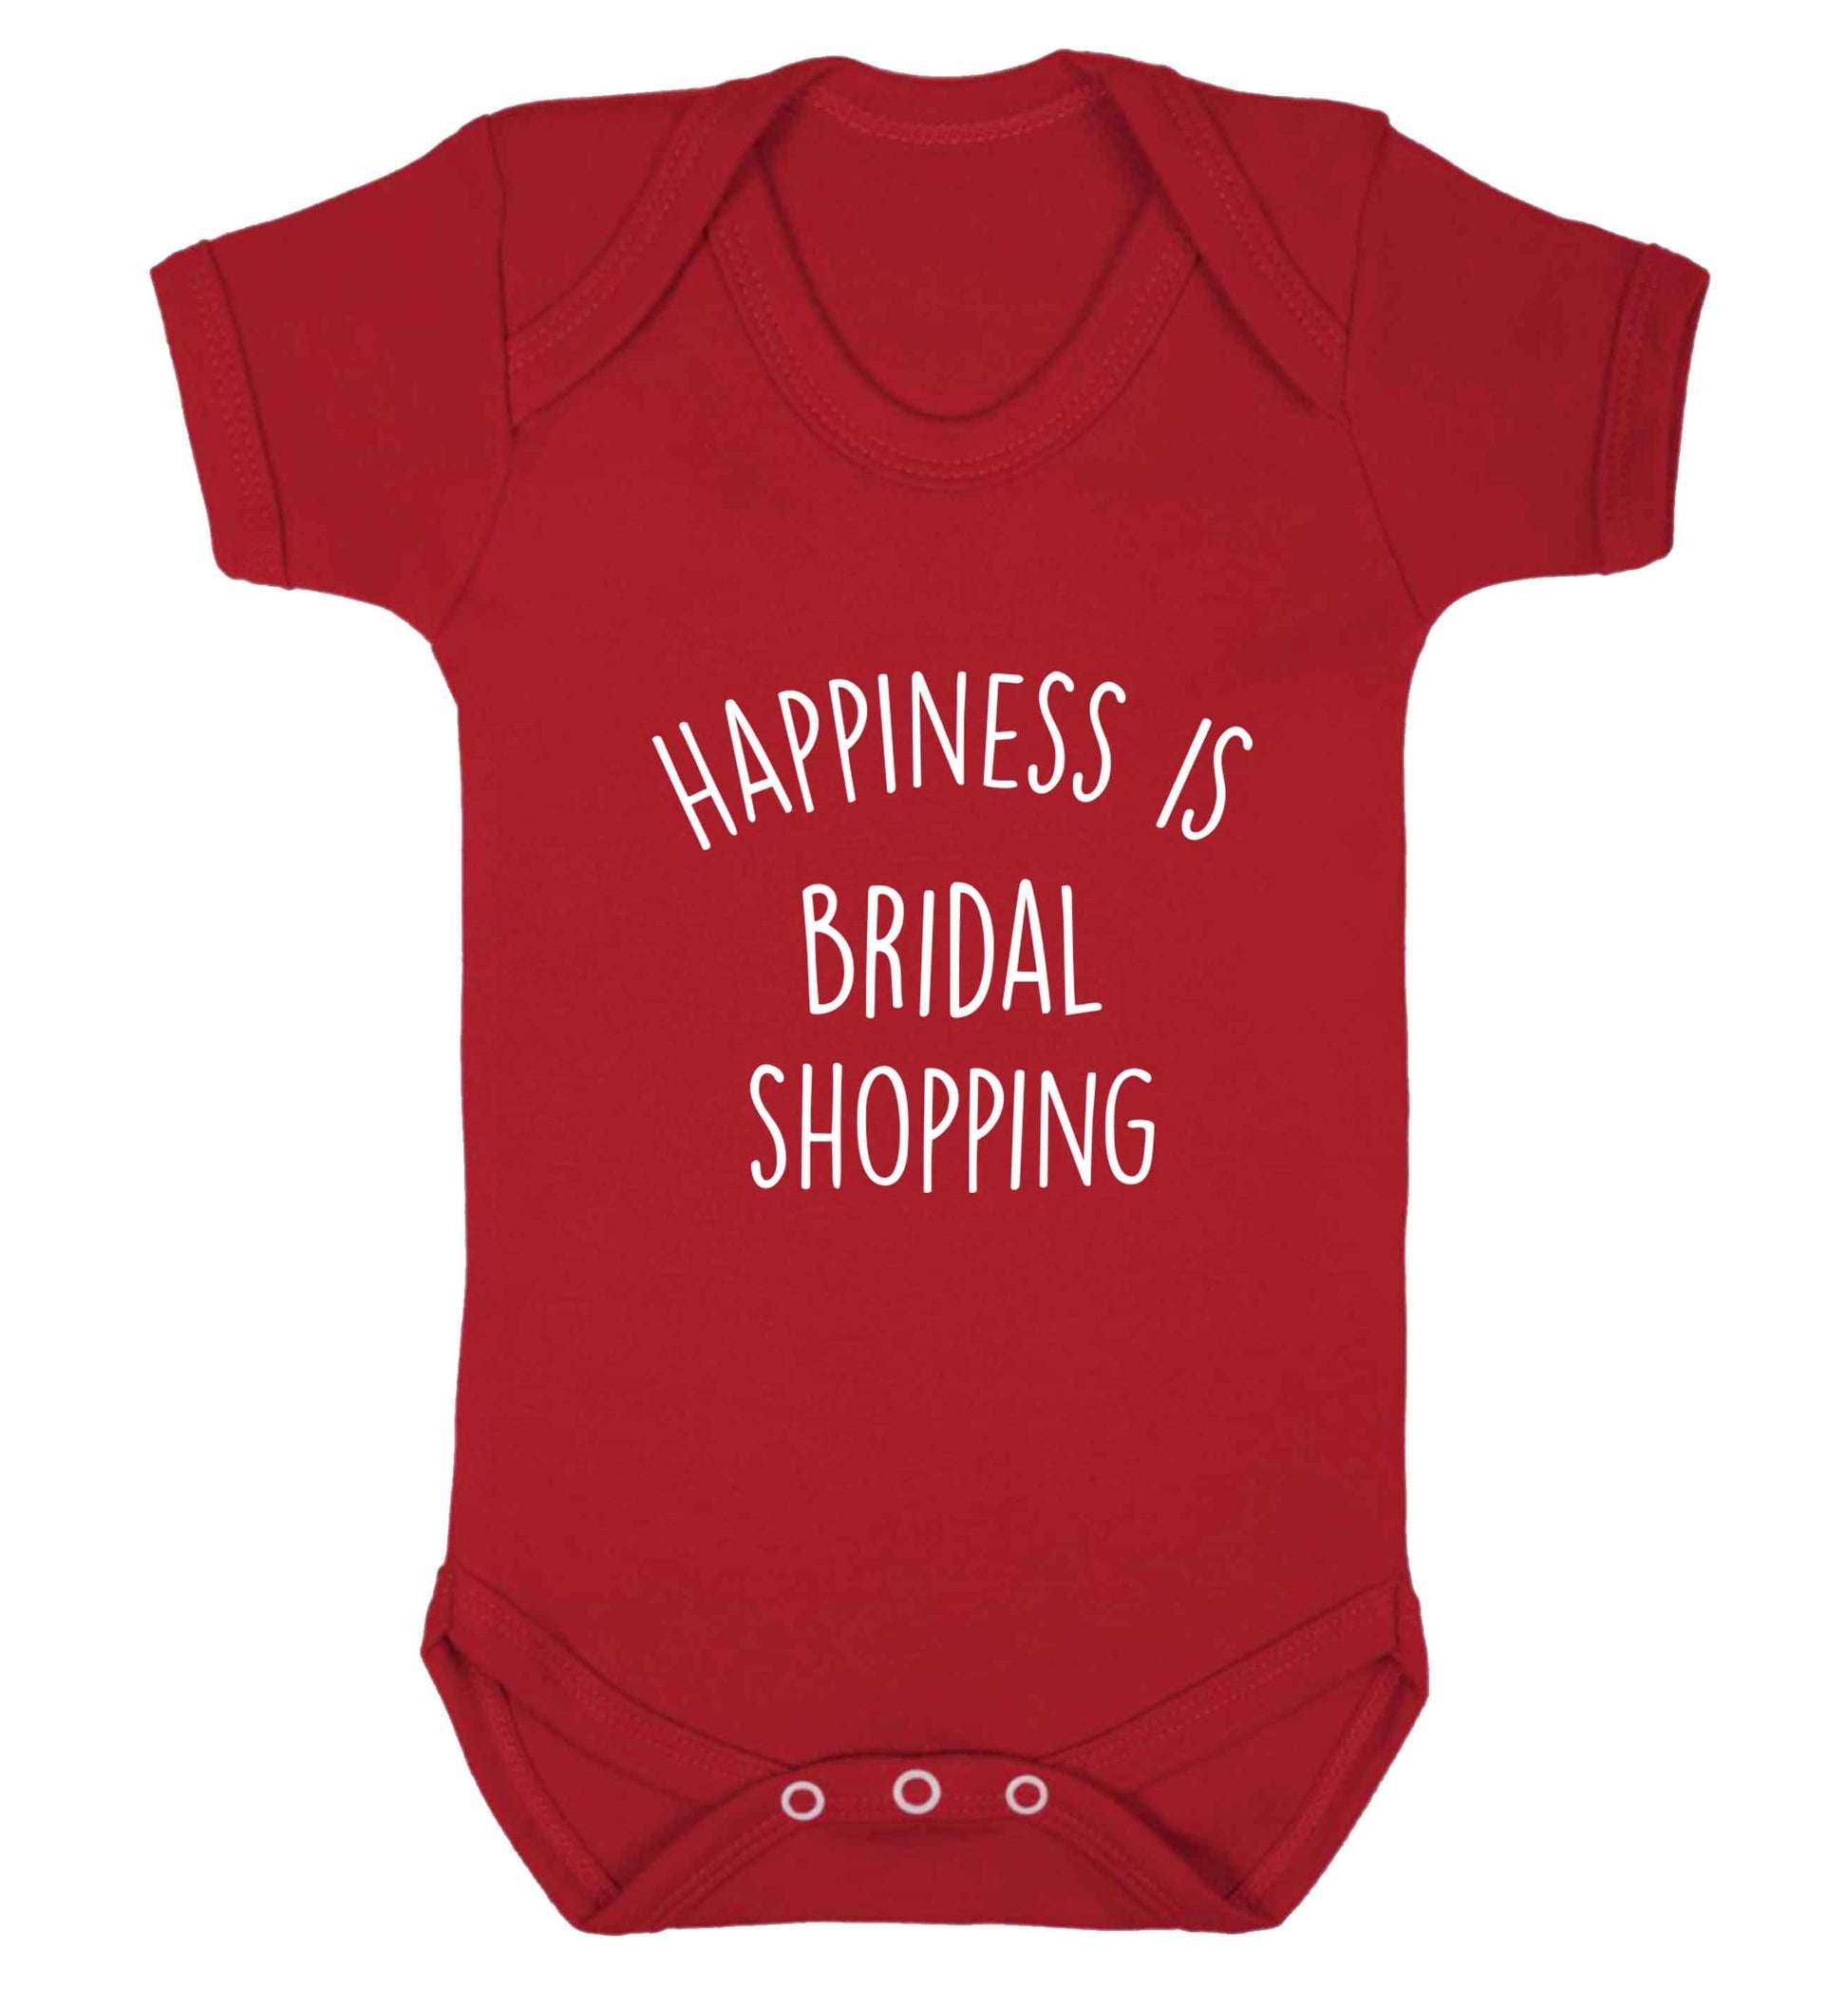 Happiness is bridal shopping baby vest red 18-24 months